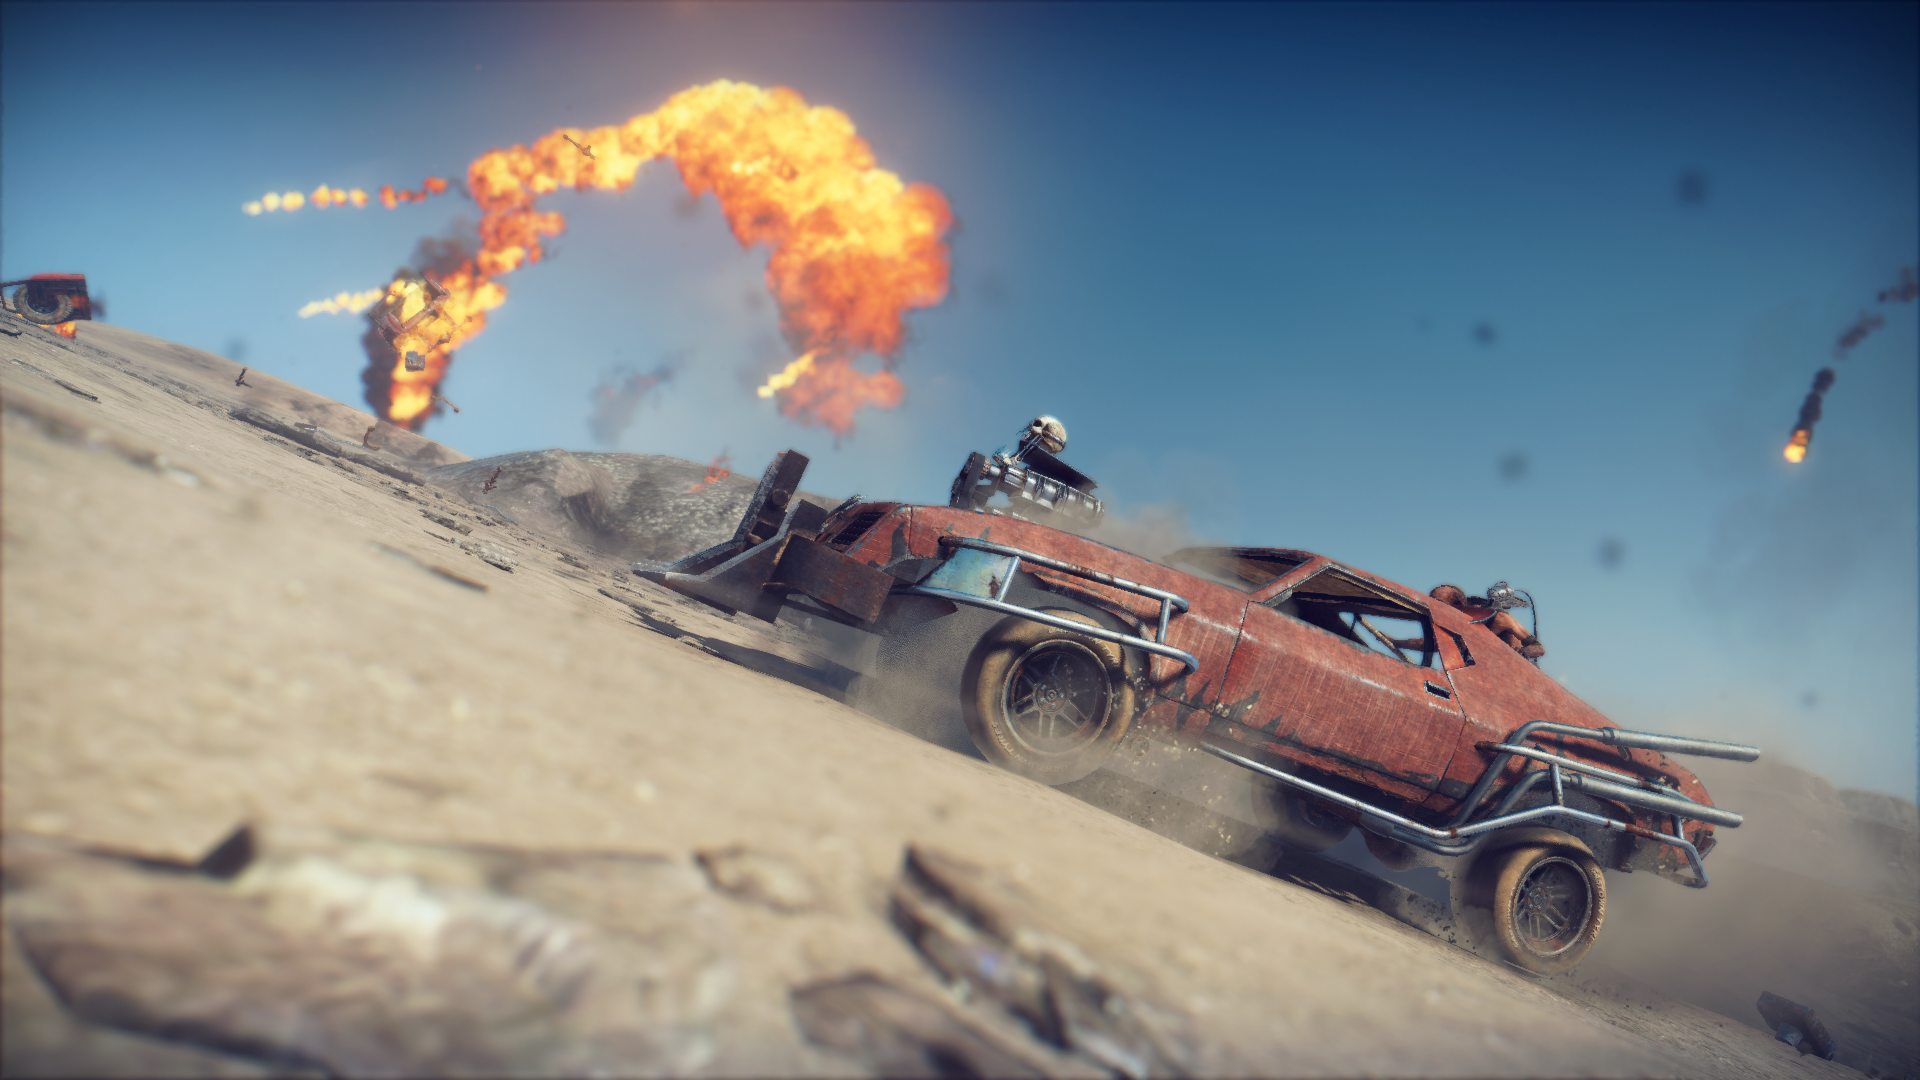 General 1920x1080 Mad Max (game) car post apocalypse desert vehicle offroad explosion dirty Mad Max video games video game art screen shot video game car CGI sky clear sky dust low-angle